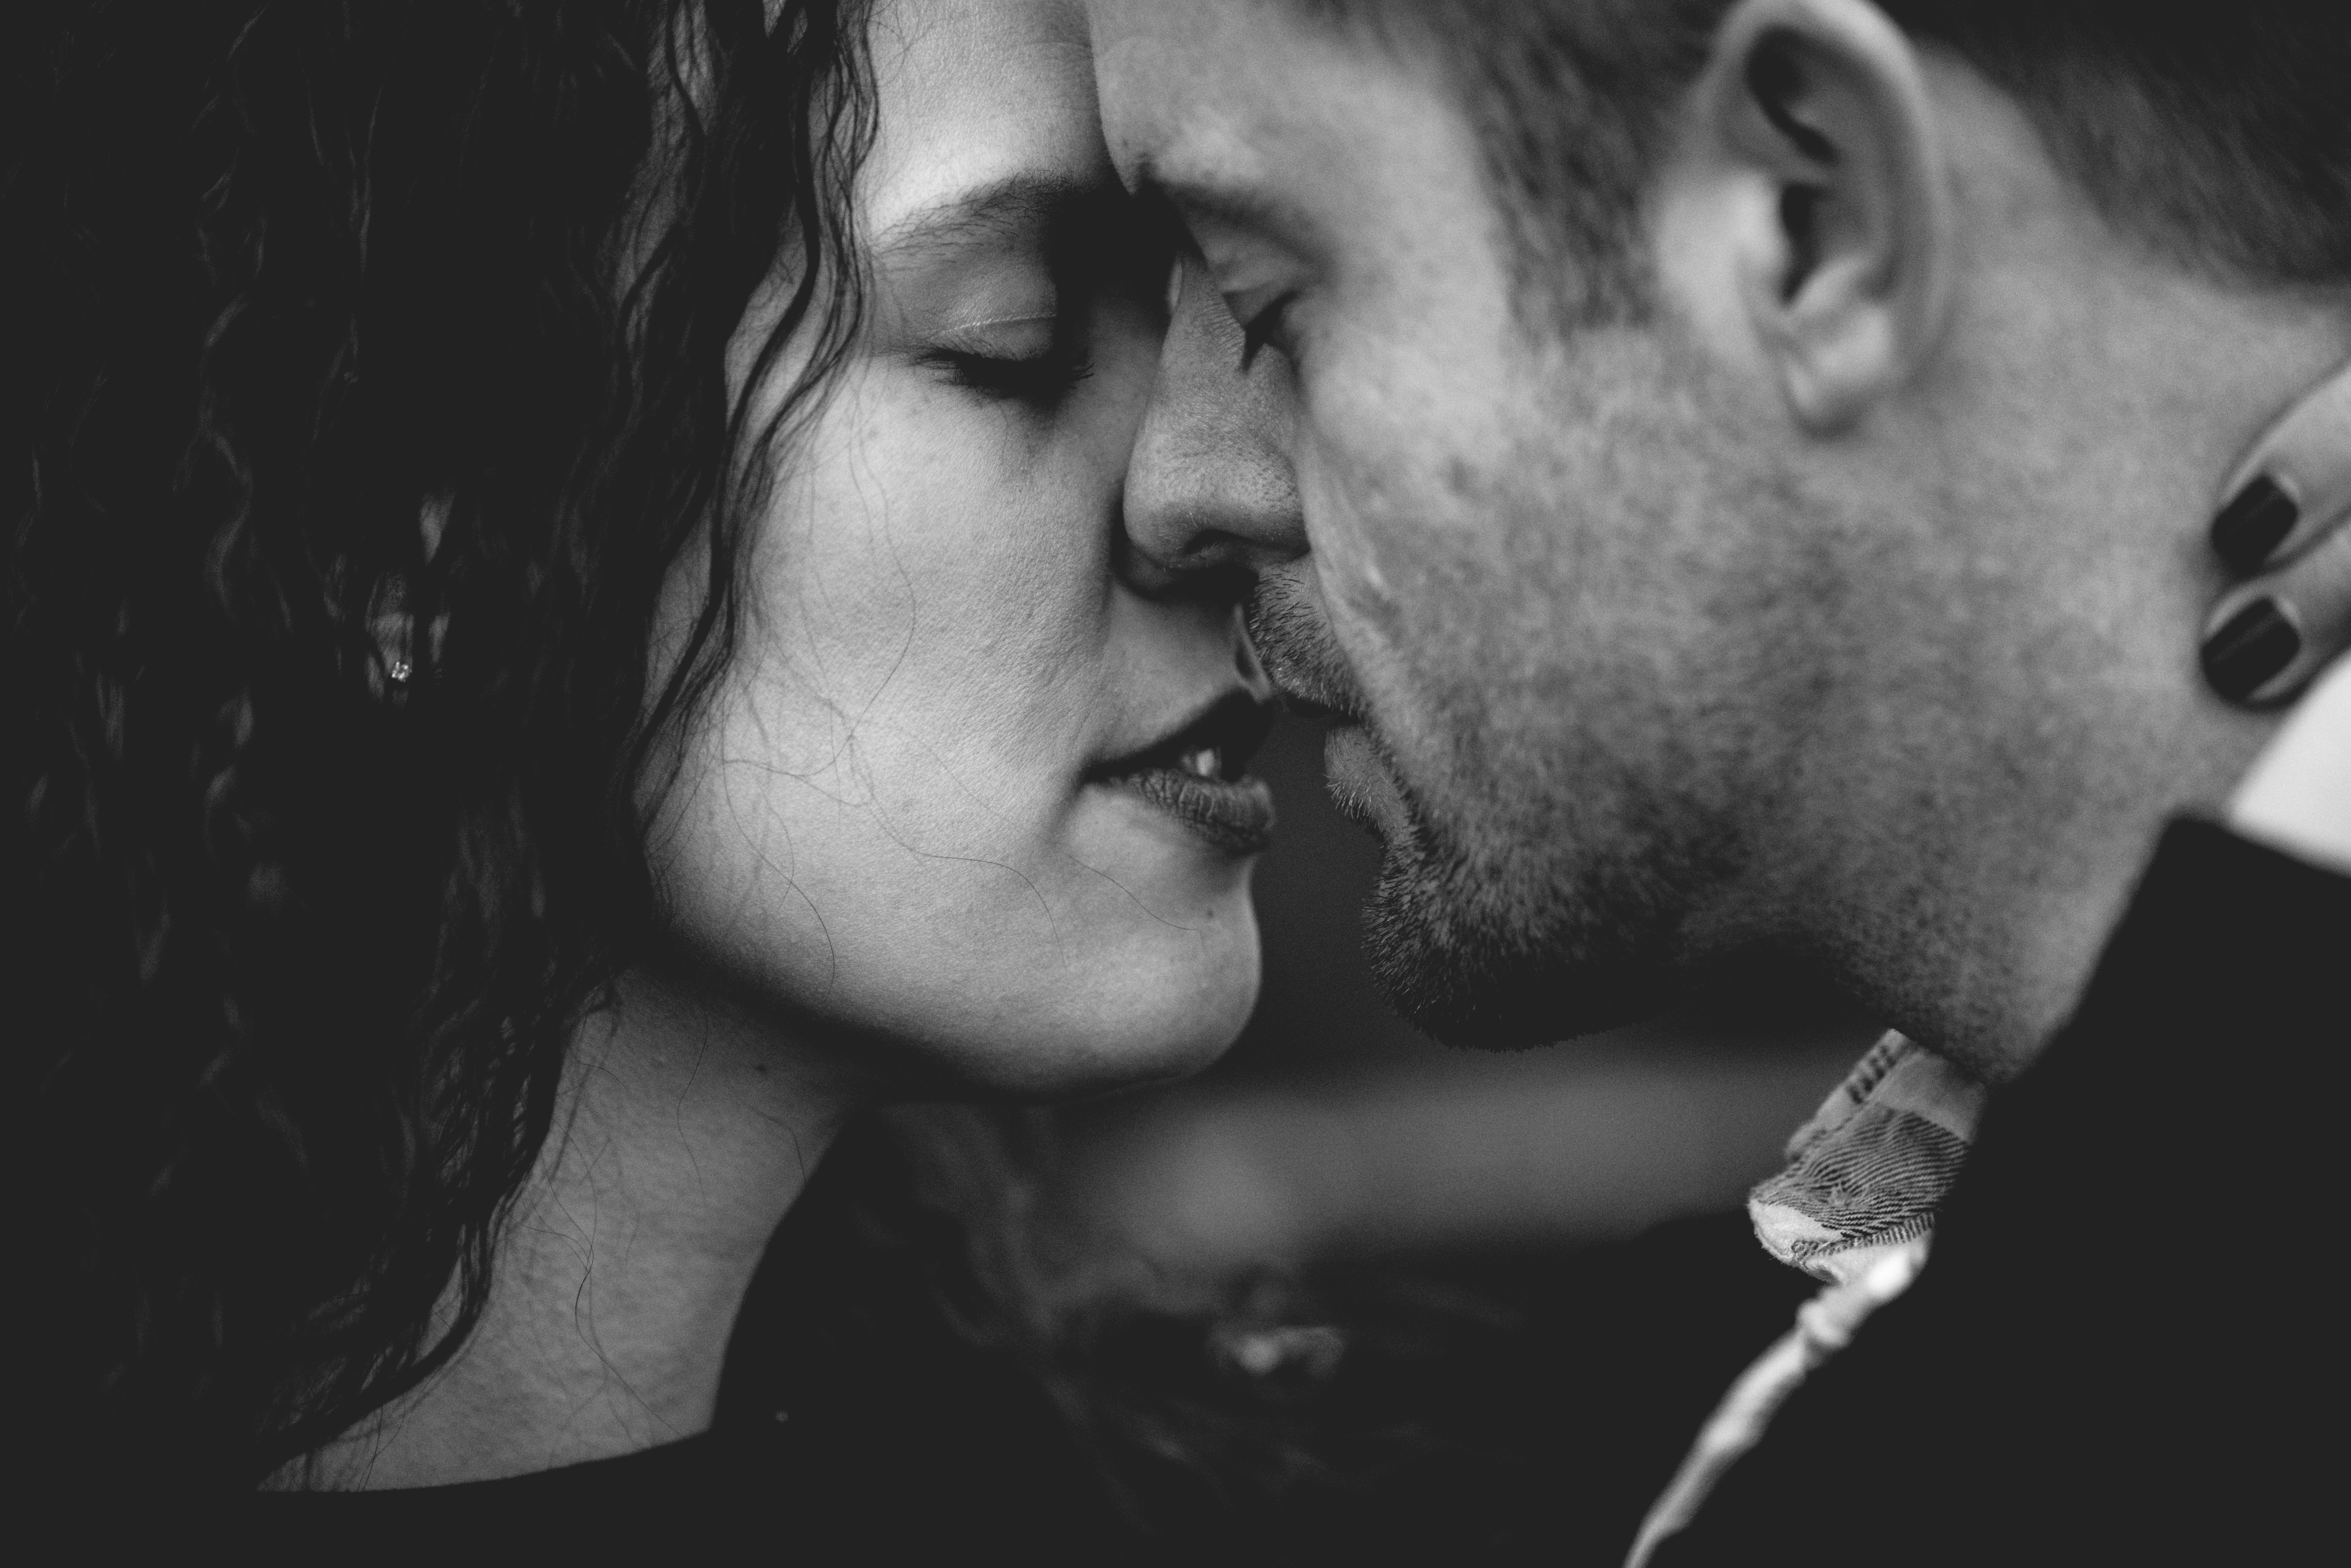 A couple on the verge of kissing. | Source: Pexels